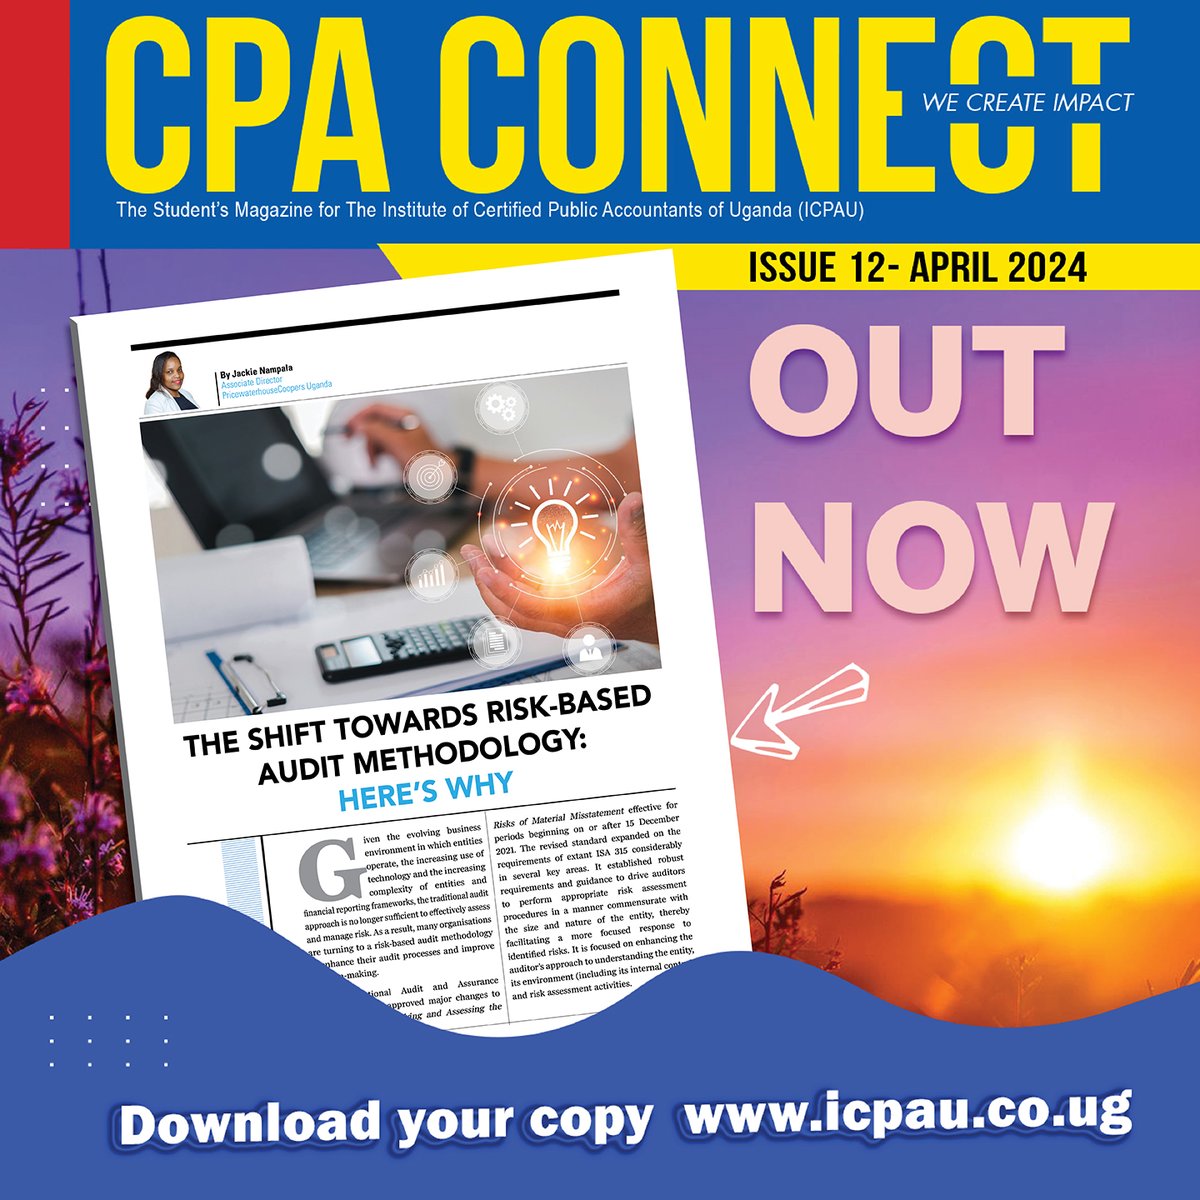 Discover the shift towards risk-based audit methodology with insights from Jackie Nampala in the latest issue of CPA Connect Magazine.

Download here: bit.ly/CPAConnect12_

#CPAConnect
#WeCreateImpact